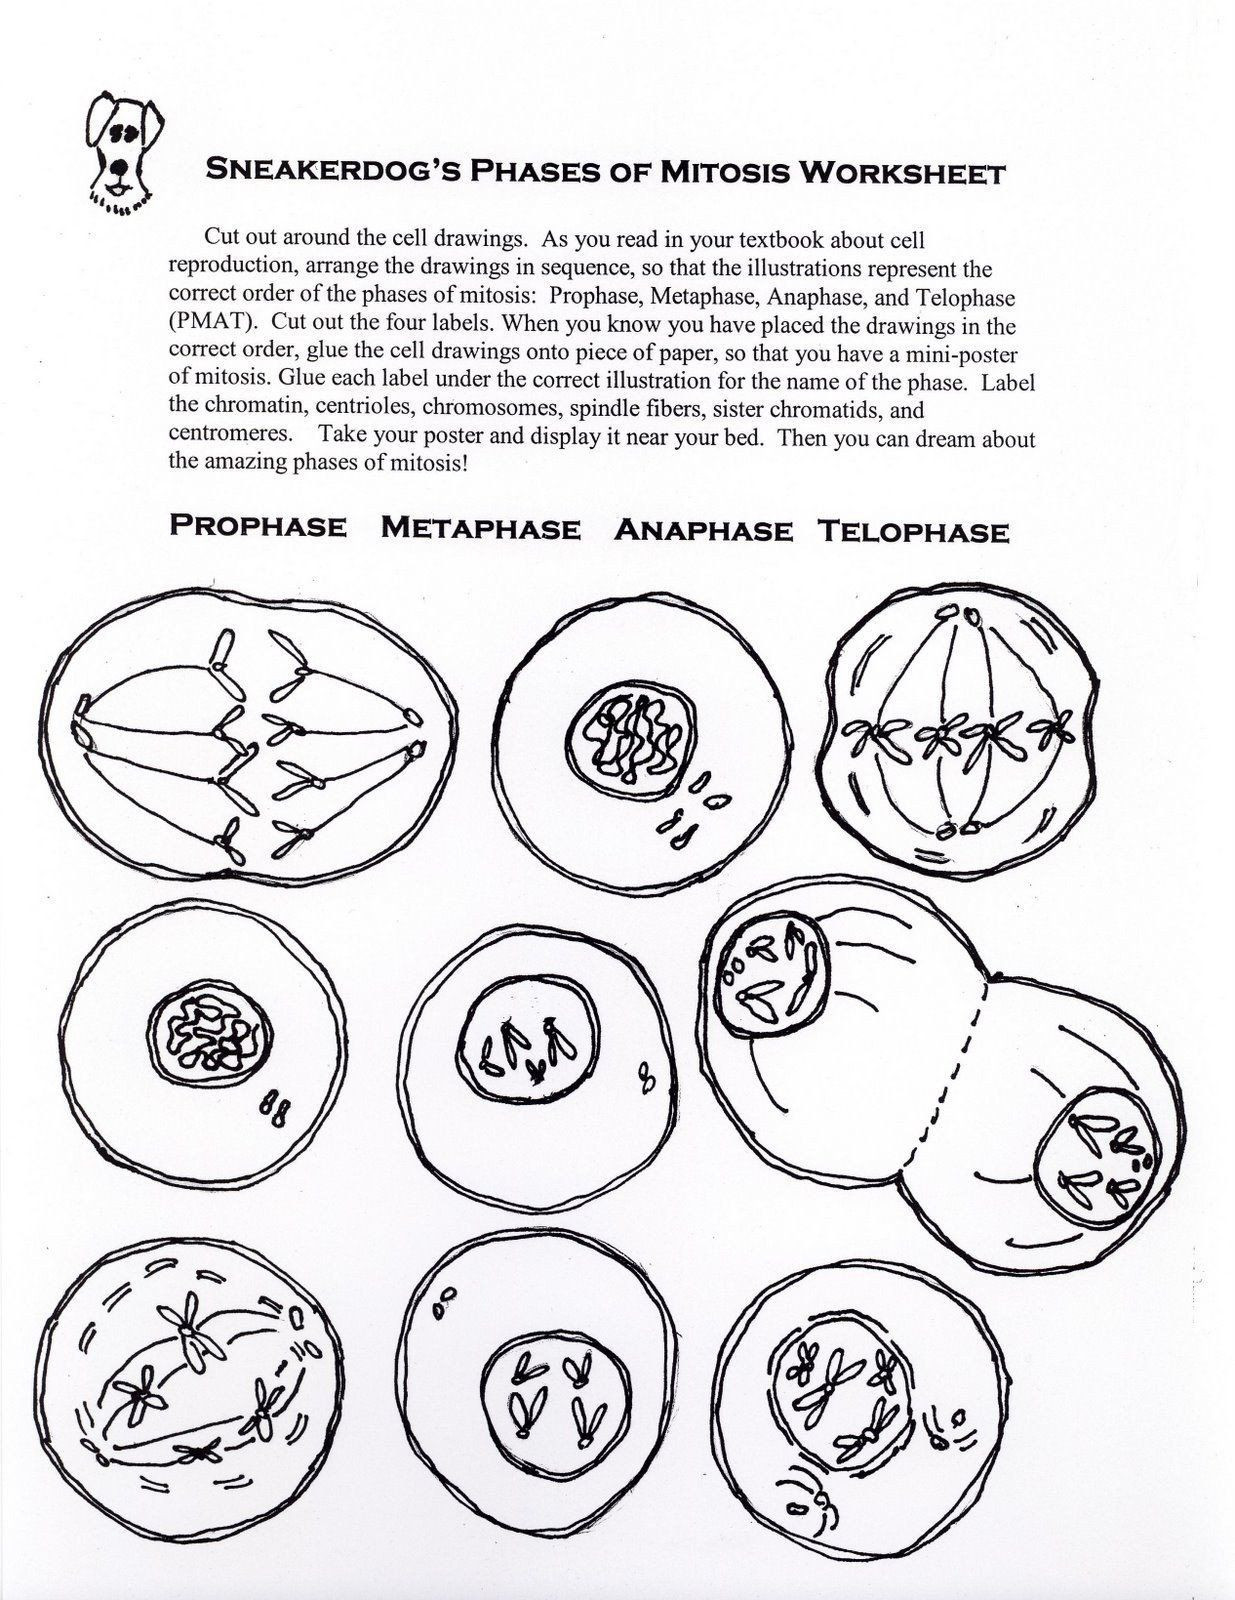 Onion Cell Mitosis Worksheet Answers Ion Cell Mitosis Worksheet Answers Mitosis1 Jpg] In 2020